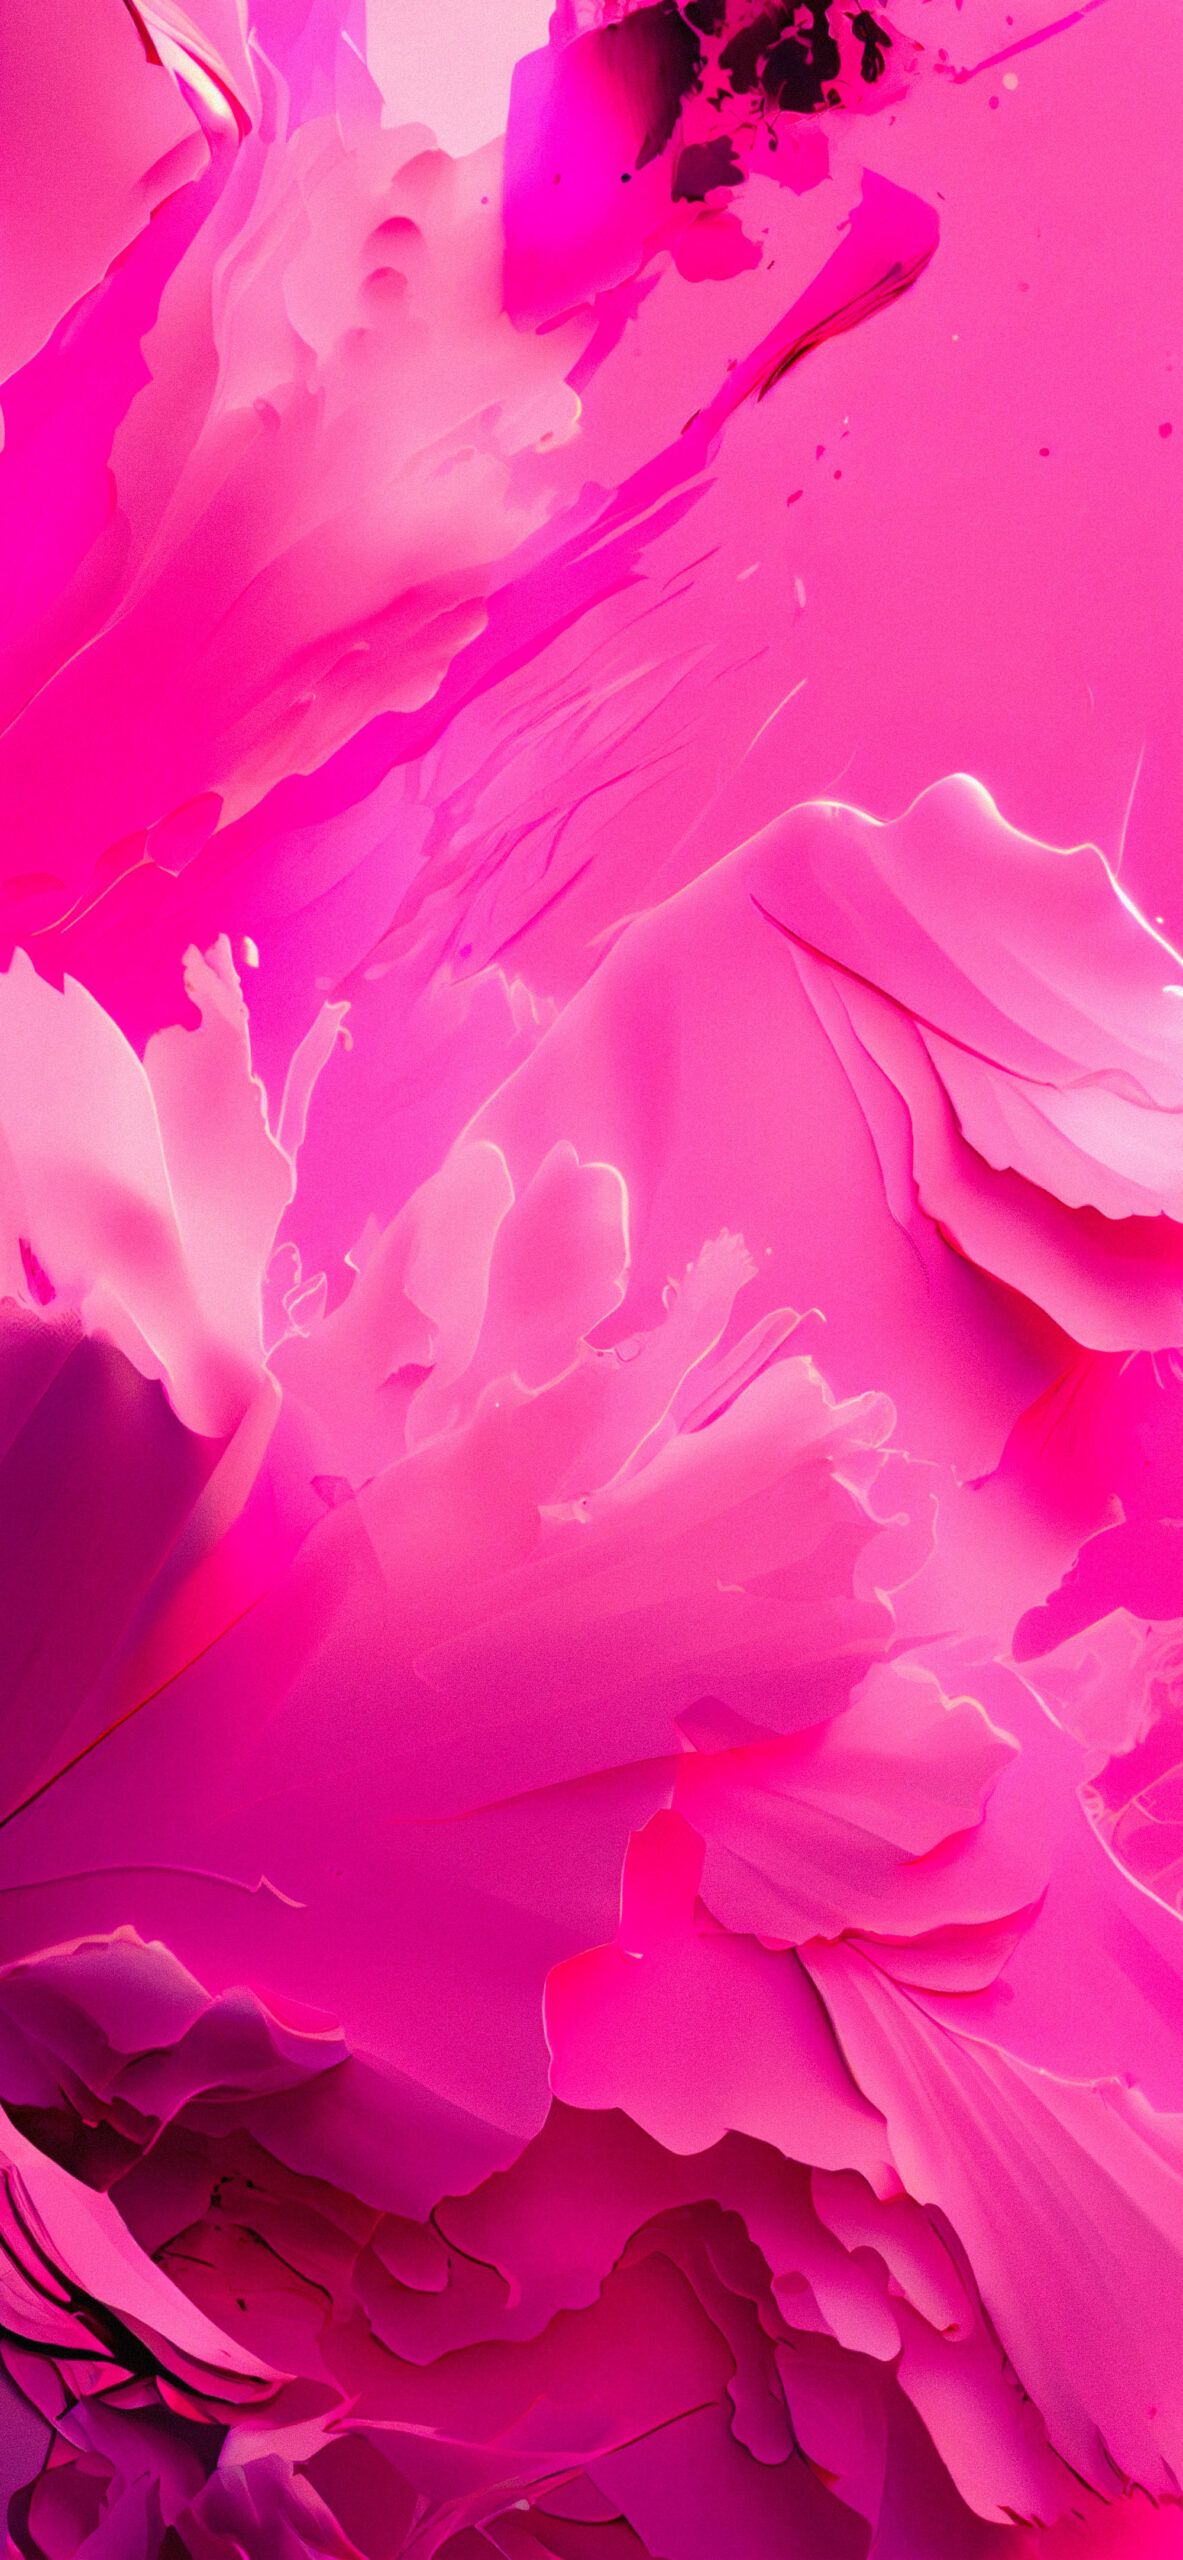 Abstract Hot Pink Wallpaper Phone - Girly Aesthetic Pink Wallpaper